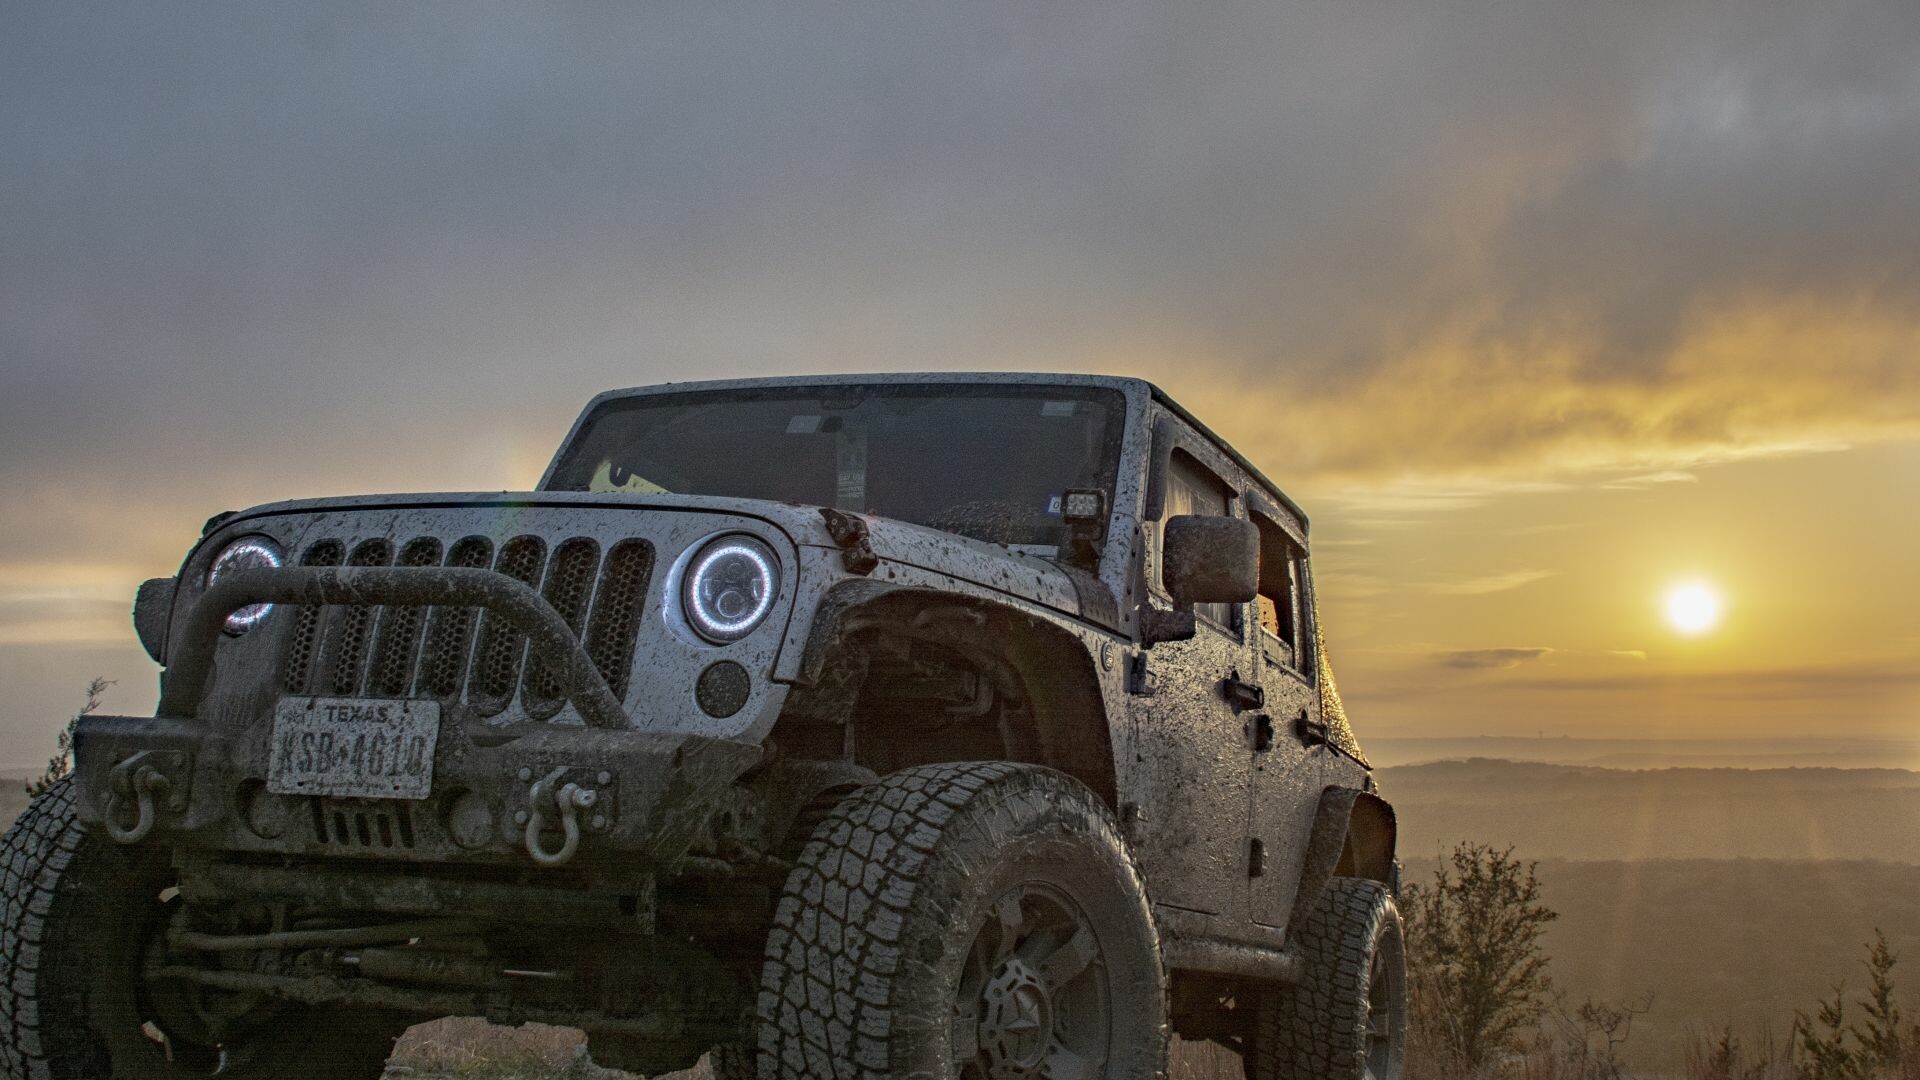 Jeep: Epic car, Off-road, Outdoor, Land vehicle. 1920x1080 Full HD Wallpaper.